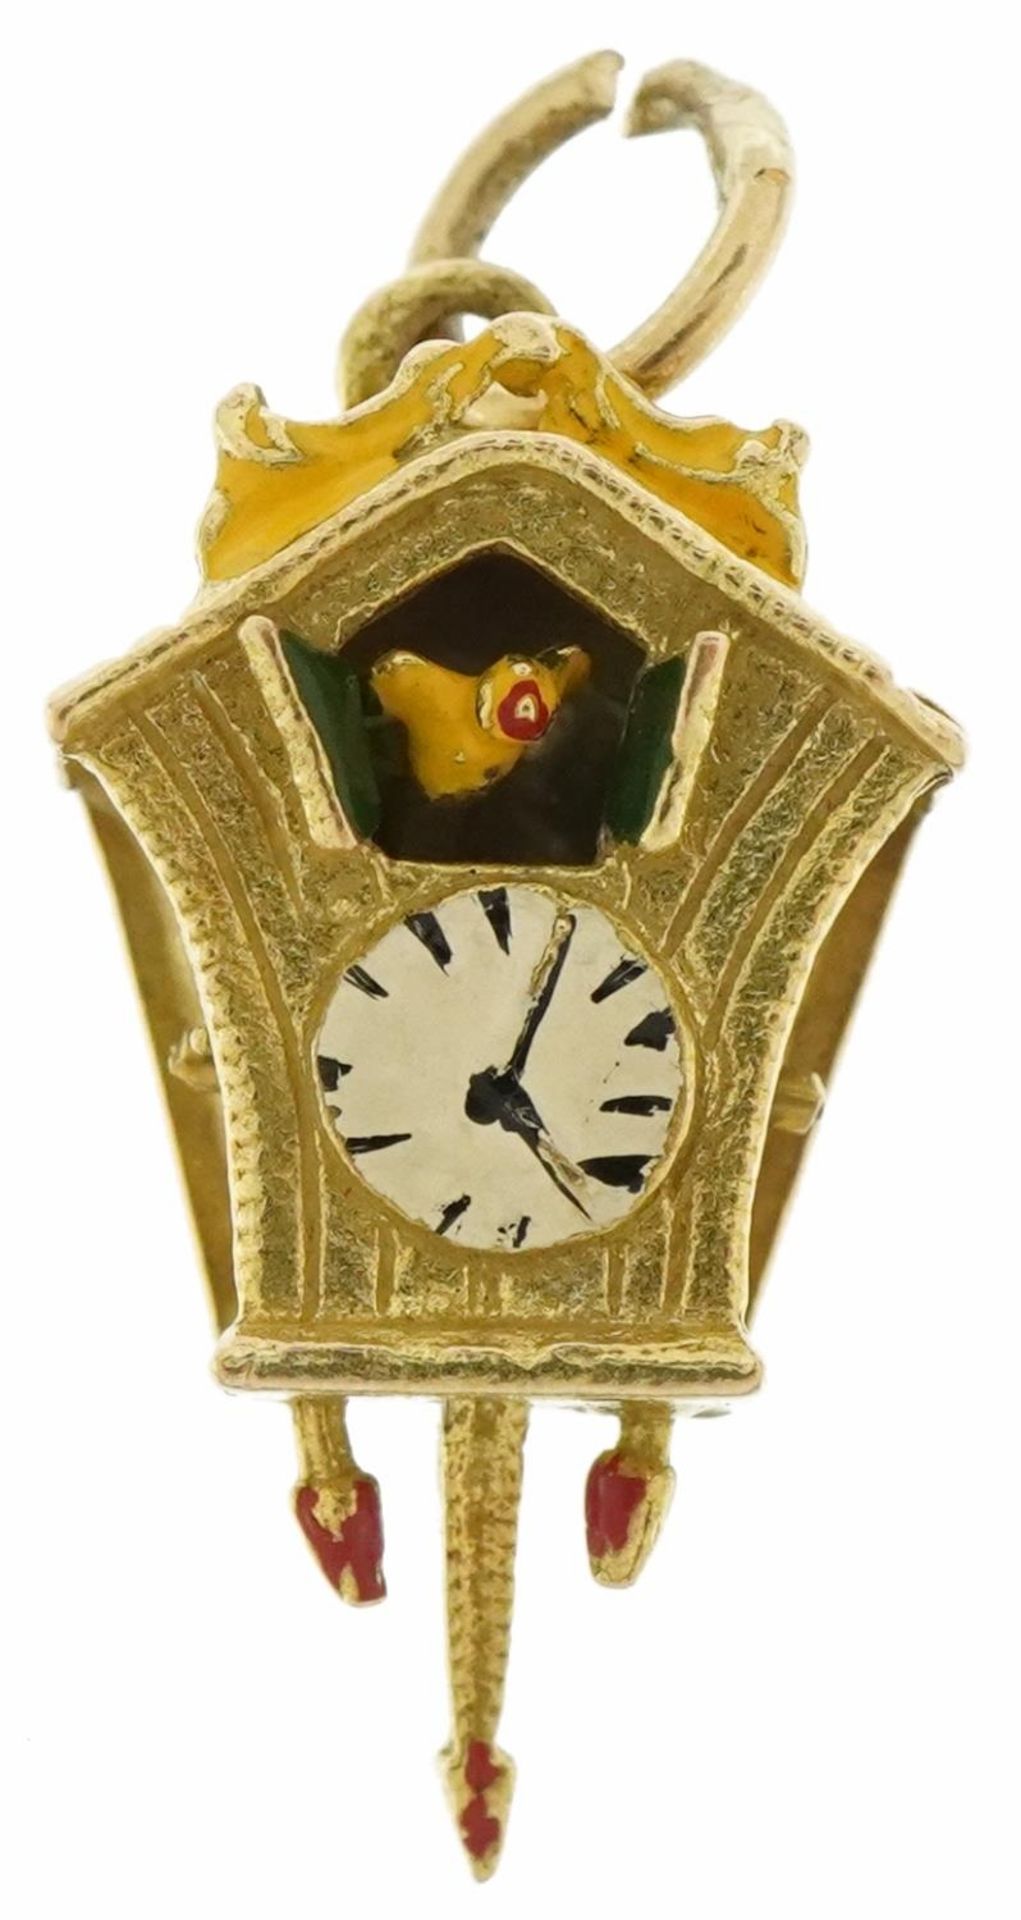 9ct gold and enamel cuckoo clock charm with moving pendulum and cuckoo, 2cm high, 2.0g : For further